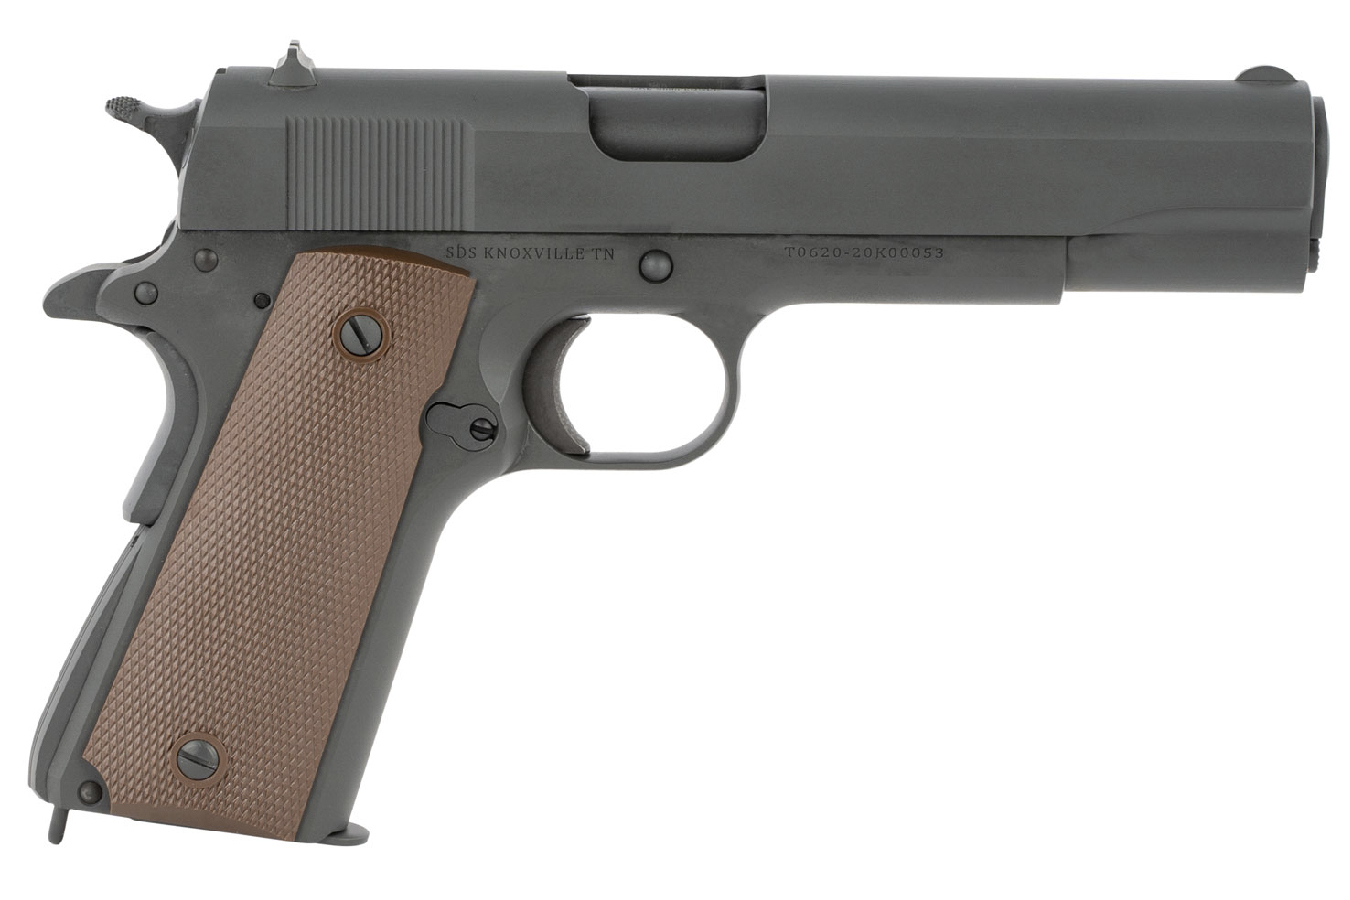 No. 5 Best Selling: TISAS 1911 A1 US ARMY 9MM PISTOL WITH CHECKERED BROWN POLYMER GRIP